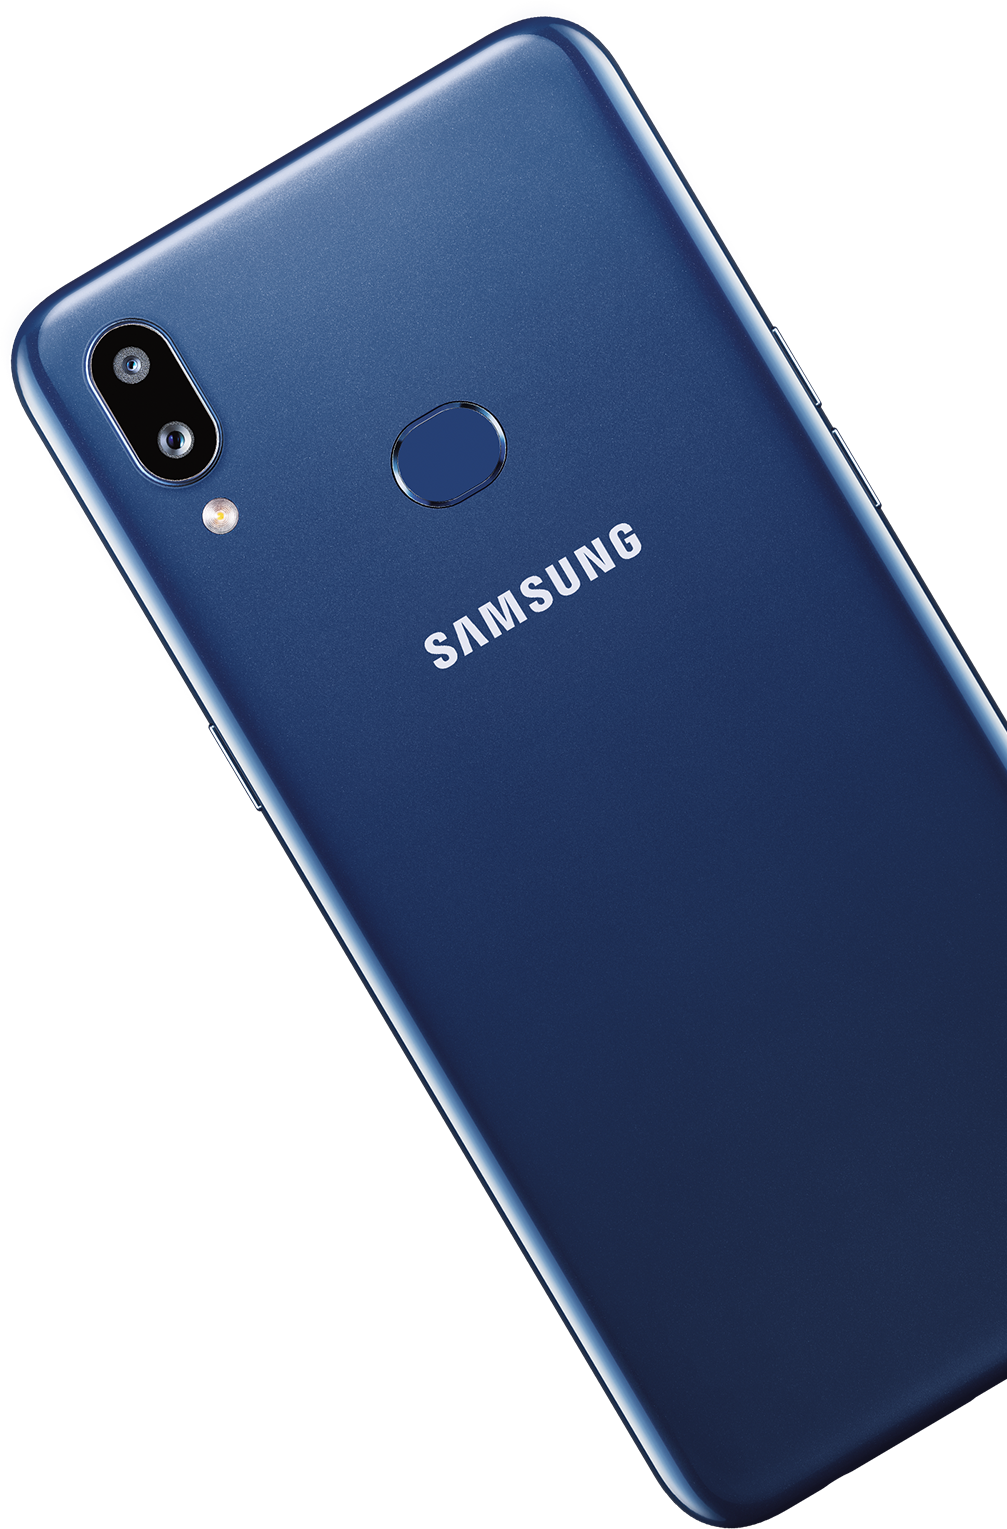 A10S Price In Malaysia - Samsung Galaxy S20 and Galaxy S20 Plus Price In Malaysia ... - Find the best samsung galaxy a9 price in malaysia.